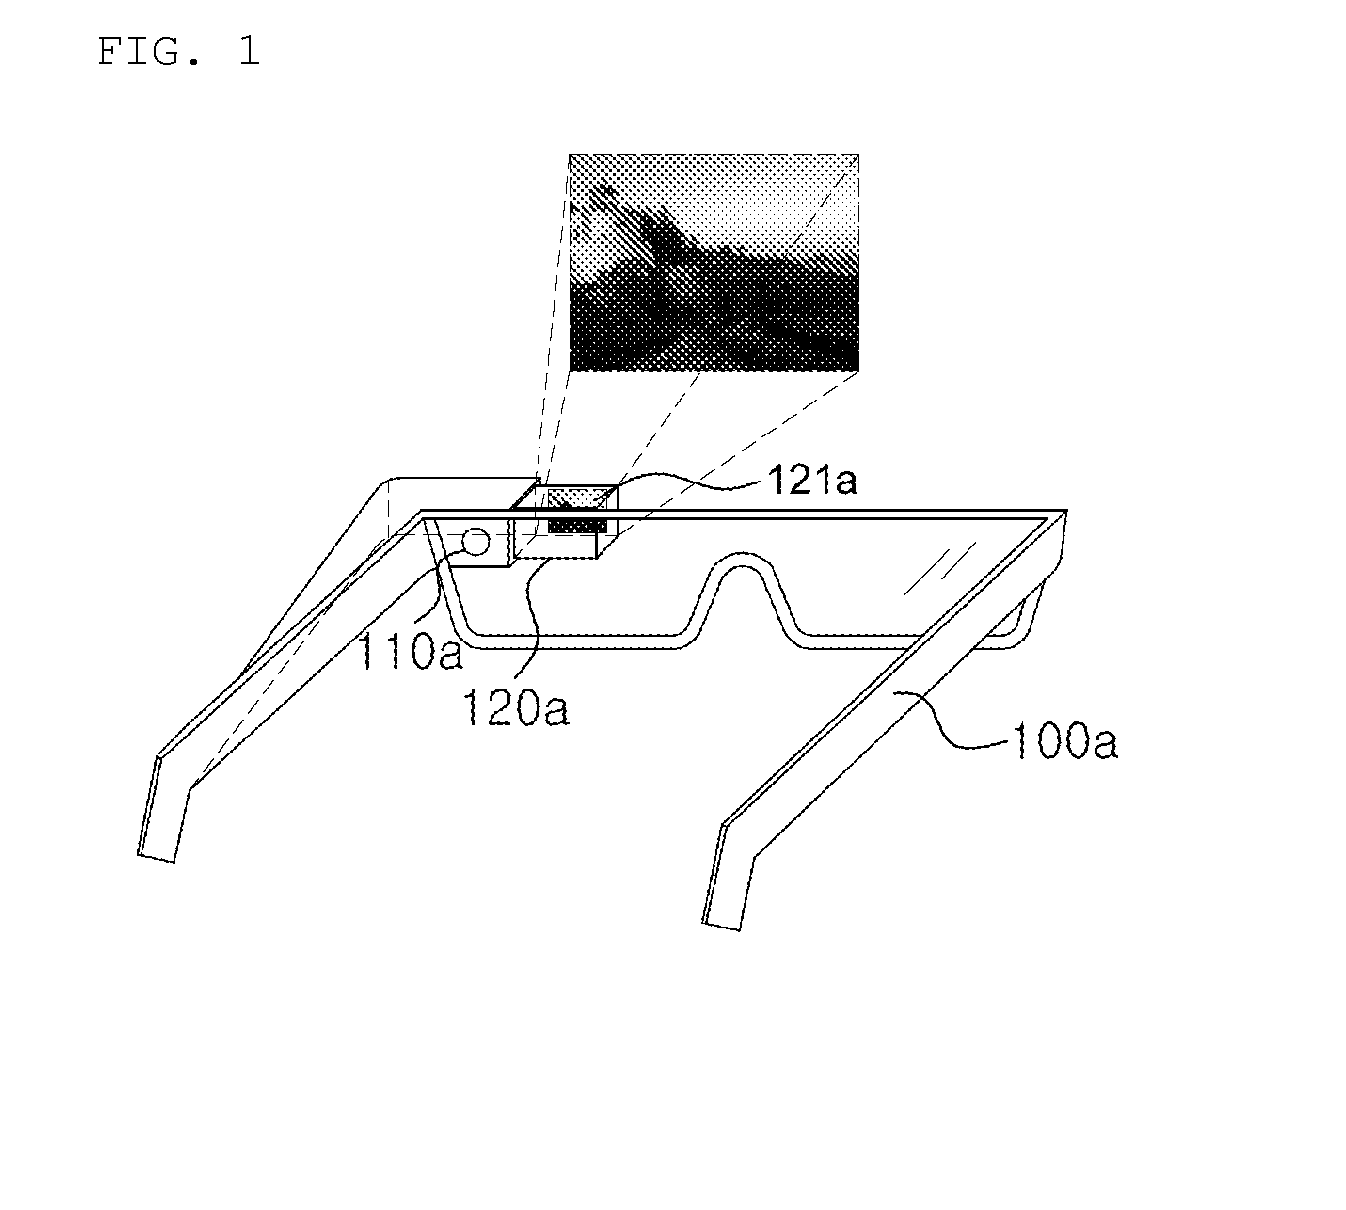 Head-mounted display apparatus with enhanced security and method for accessing encrypted information by the apparatus